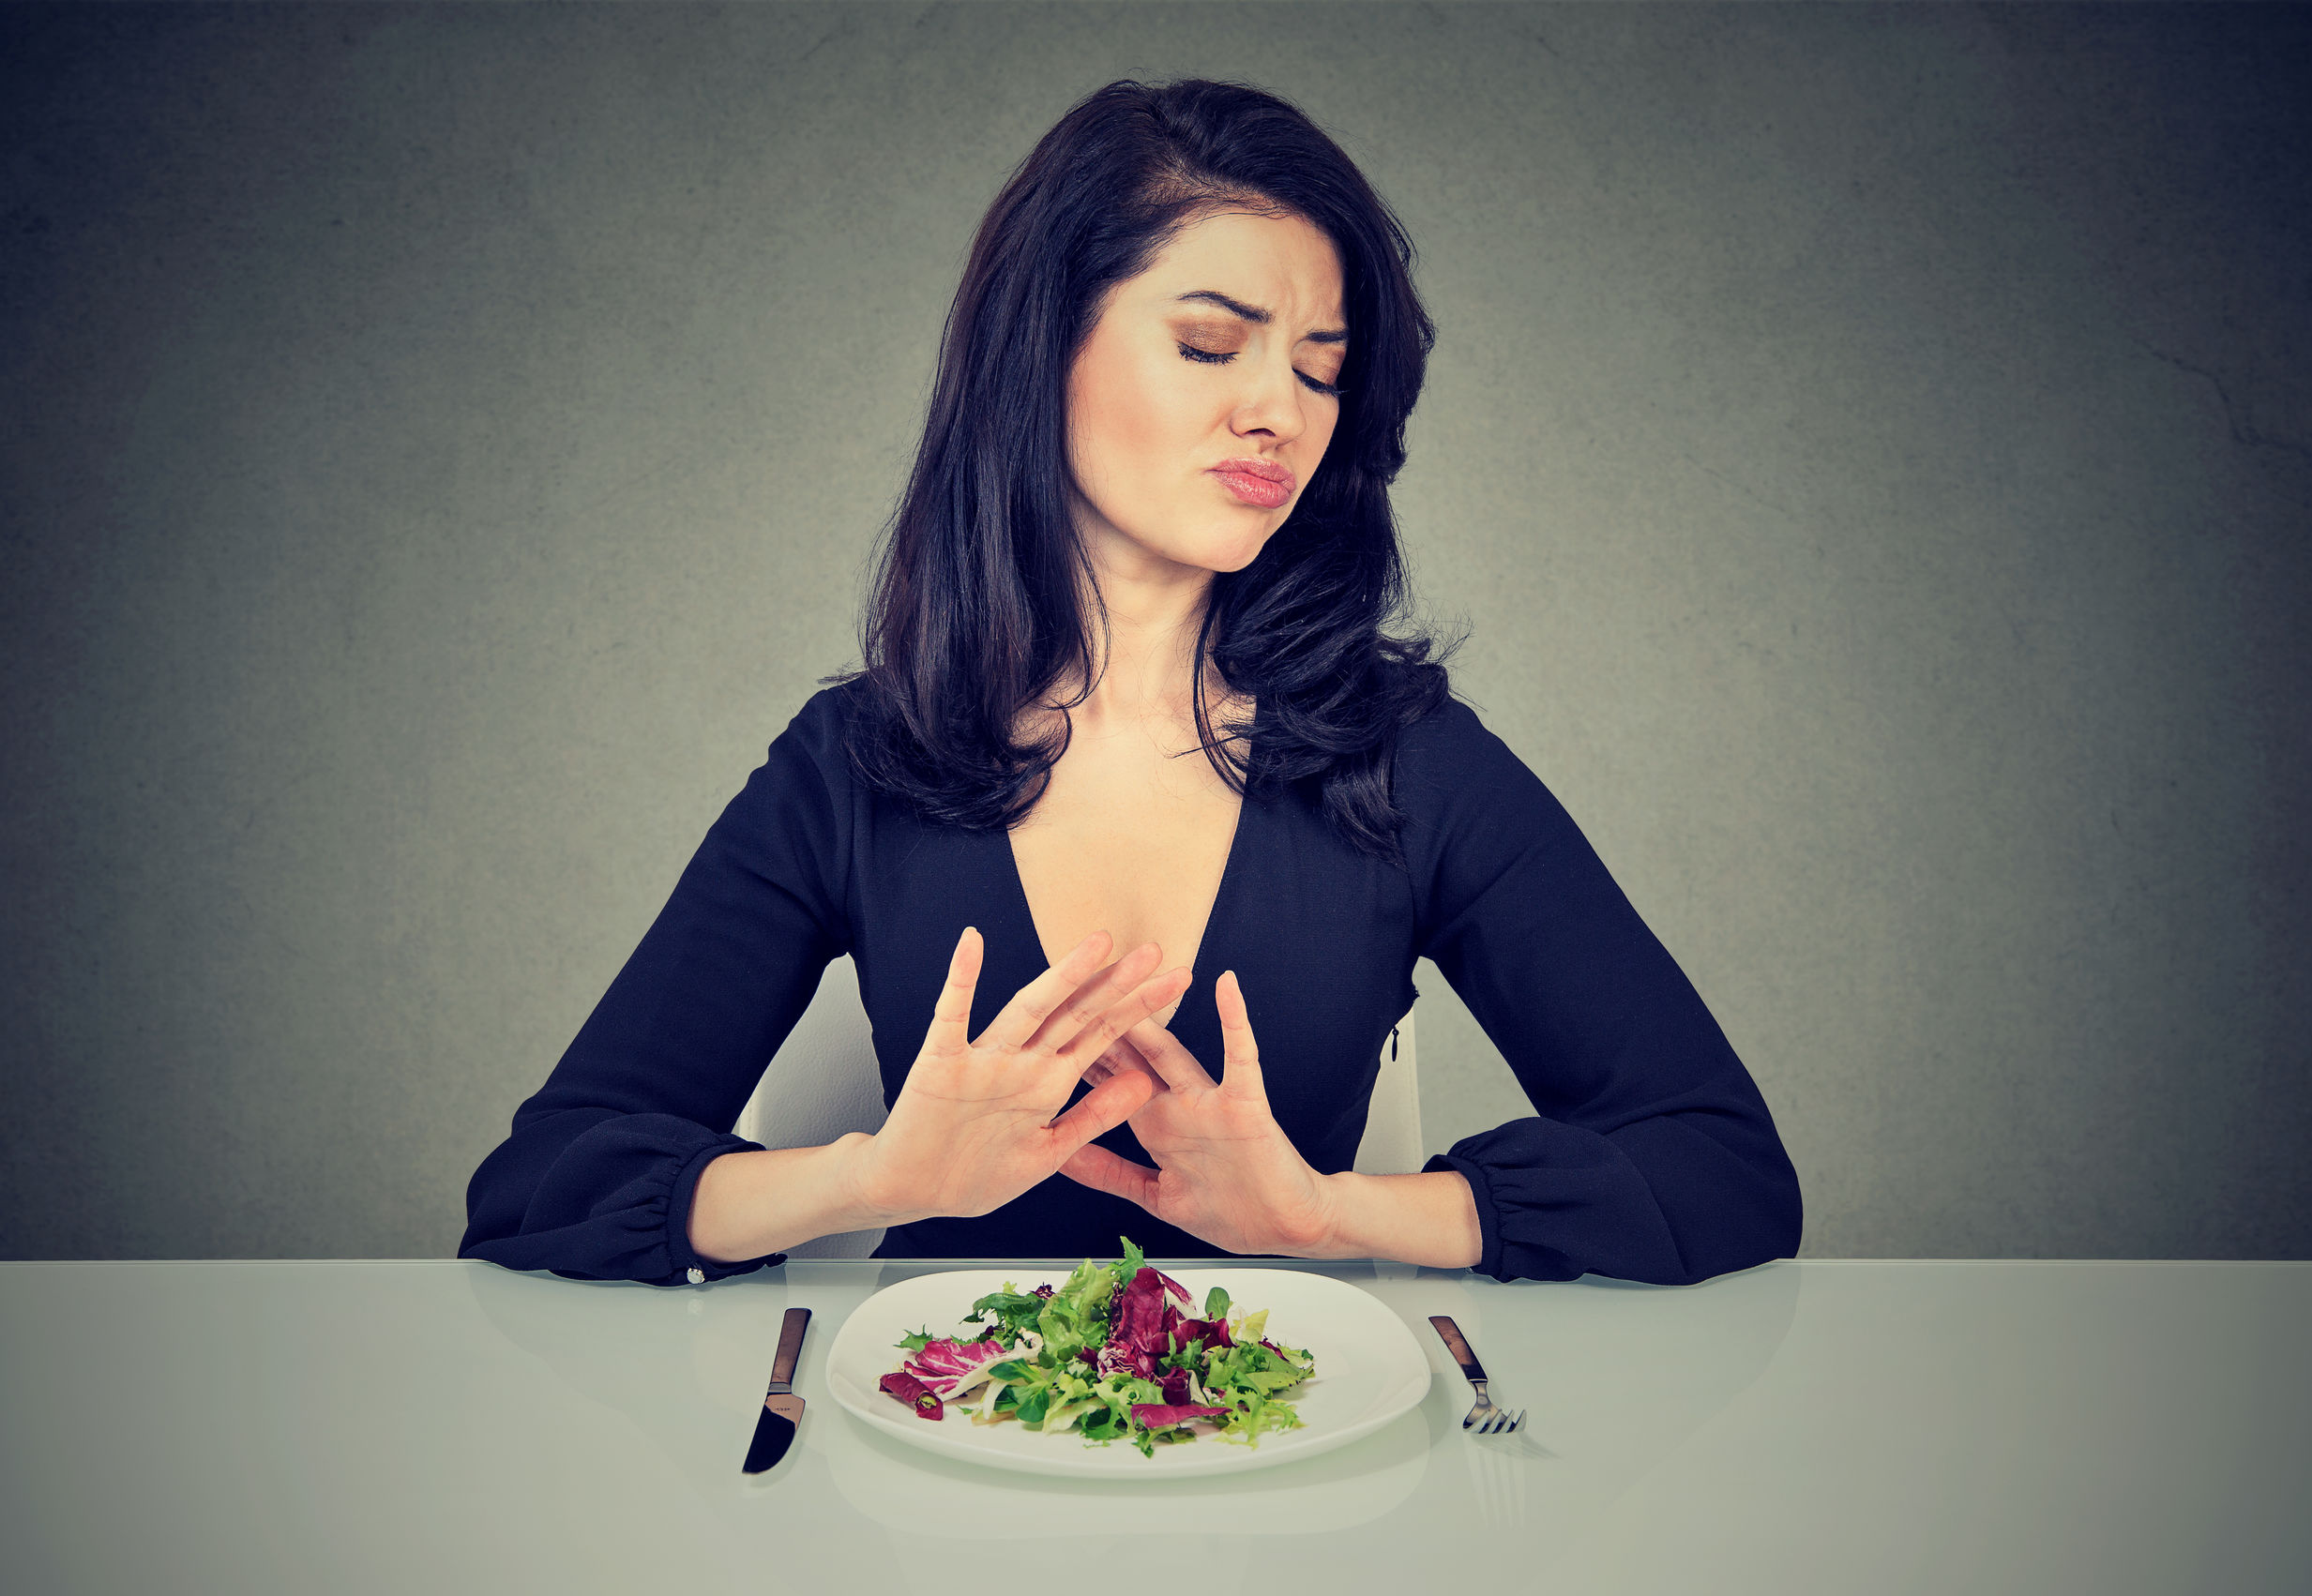 Selective Eating Disorder - Adult; Avoidant Restrictive Food Intake Disorder